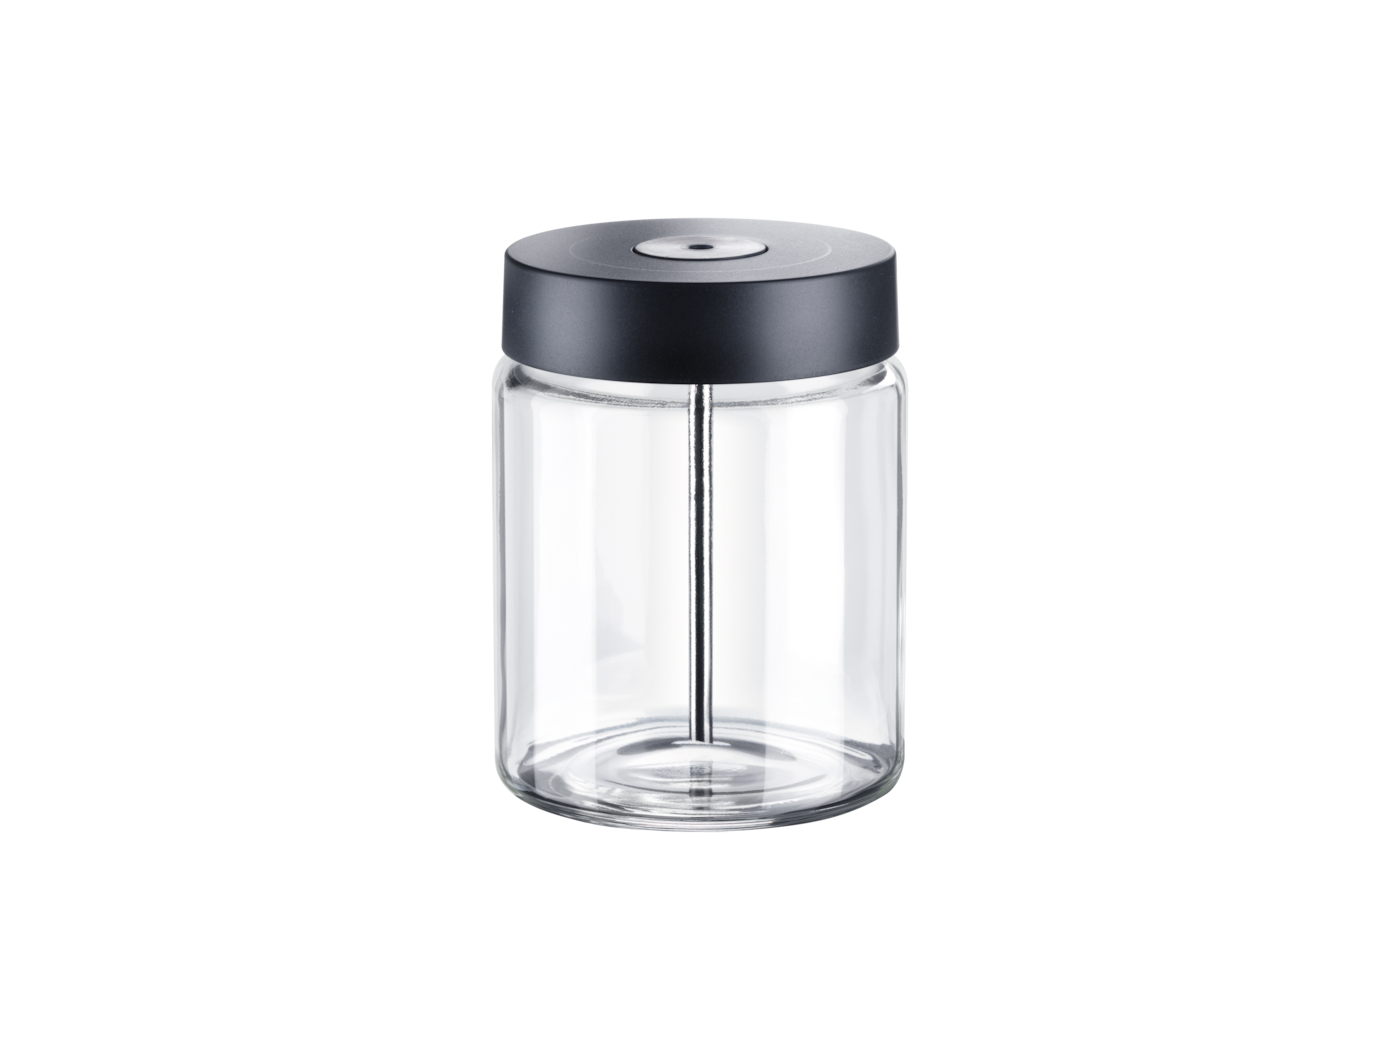 MB-CM-G - Milk container made of glass 